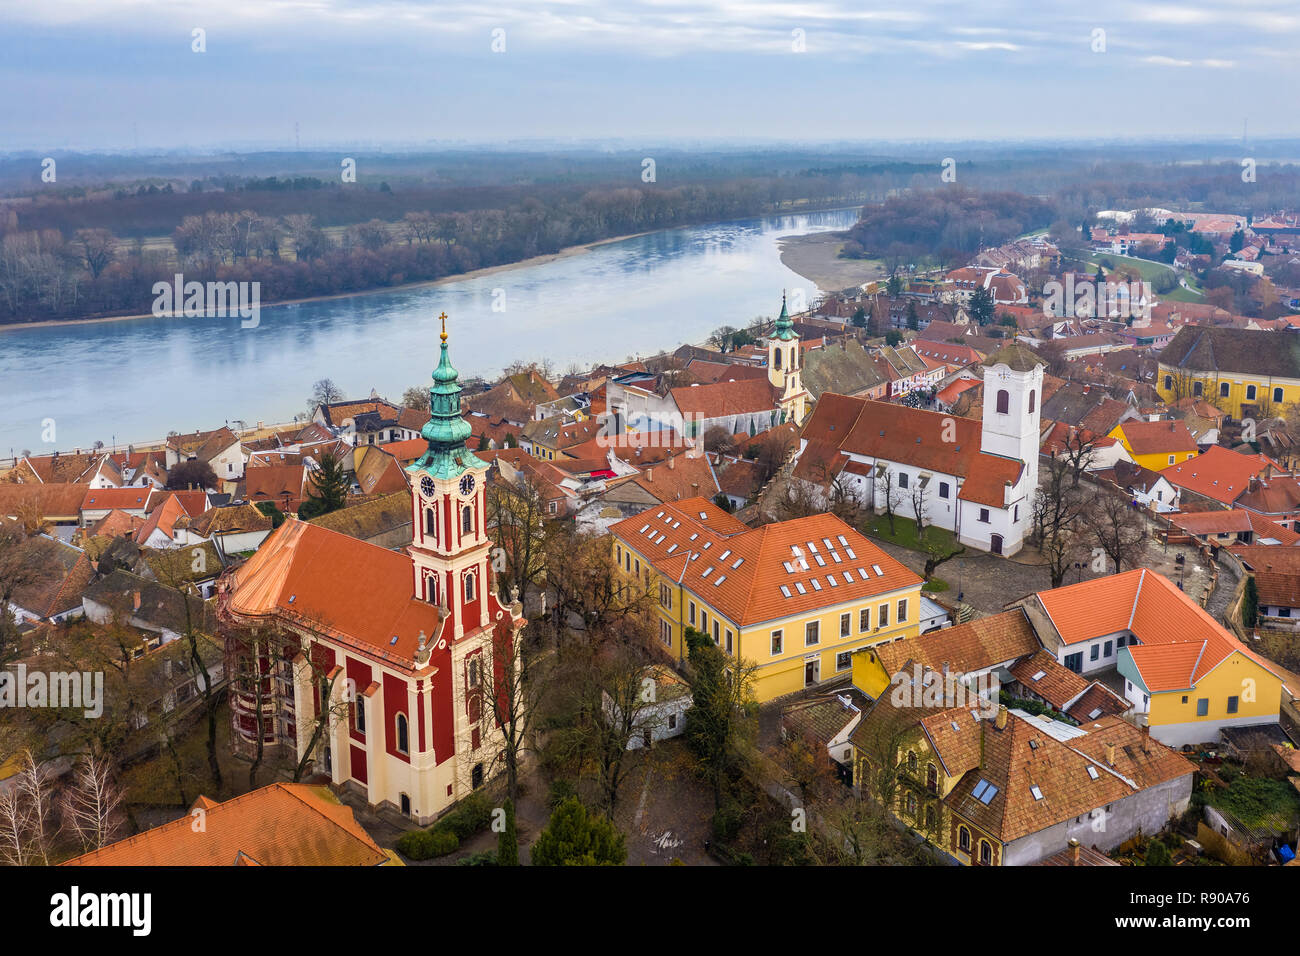 Szentendre, Hungary - Aerial skyline view of Szentendre, the small and lovely riverside town in Pest County at winter time Stock Photo